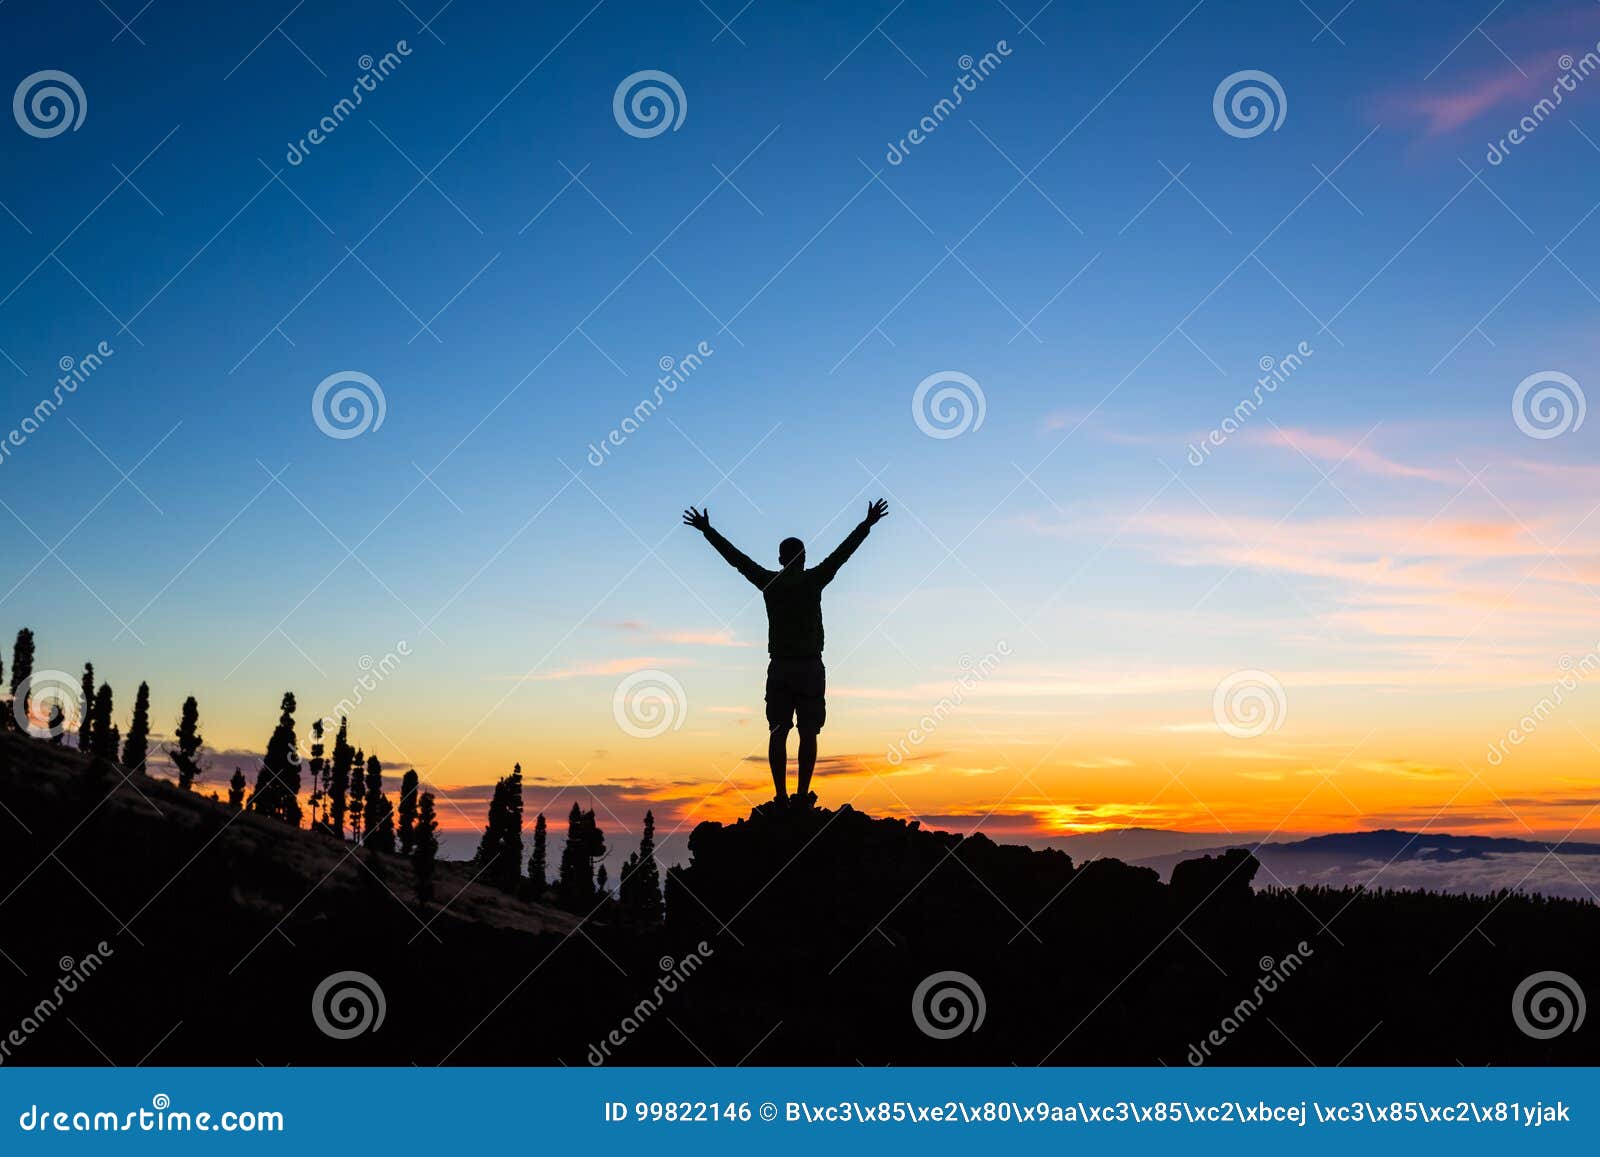 man celebrating sunset with arms outstretched in mountains